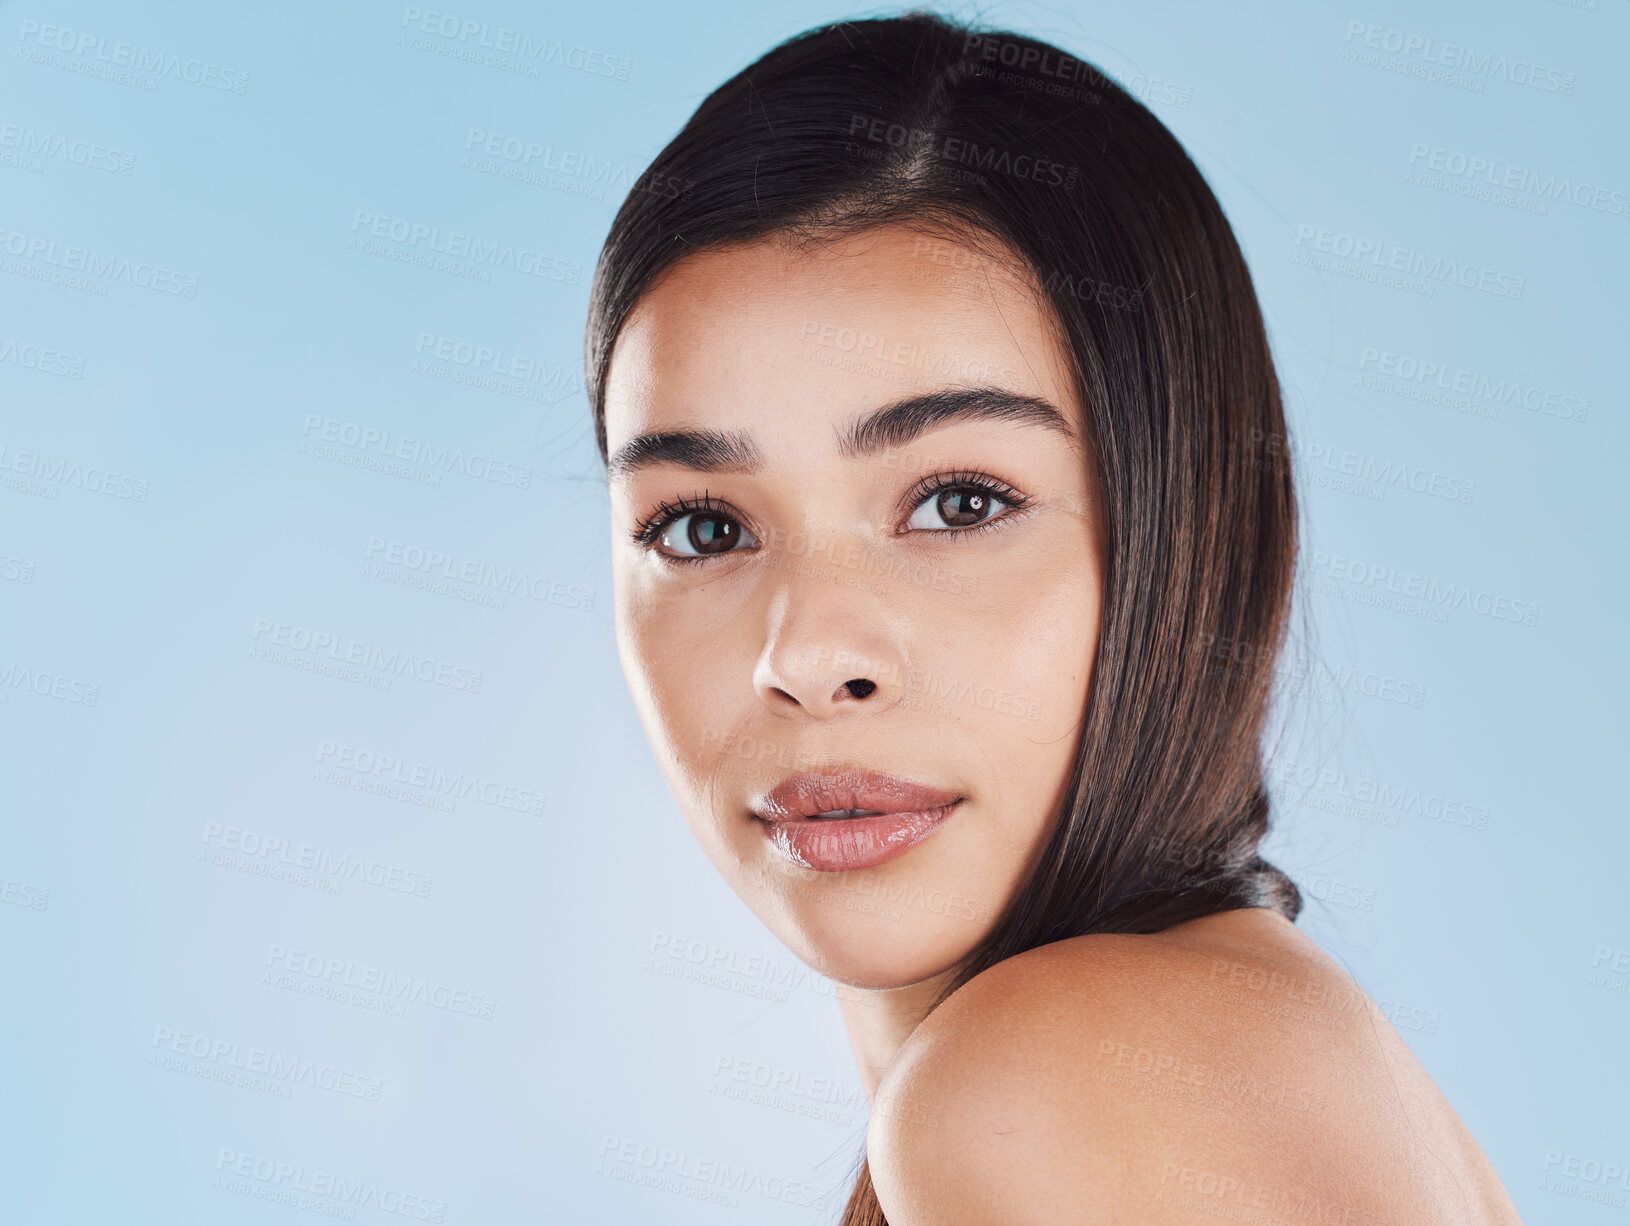 Buy stock photo Portrait of one beautiful young hispanic woman with healthy skin and sleek hair posing against a blue studio background. Mixed race model with flawless complexion and natural beauty